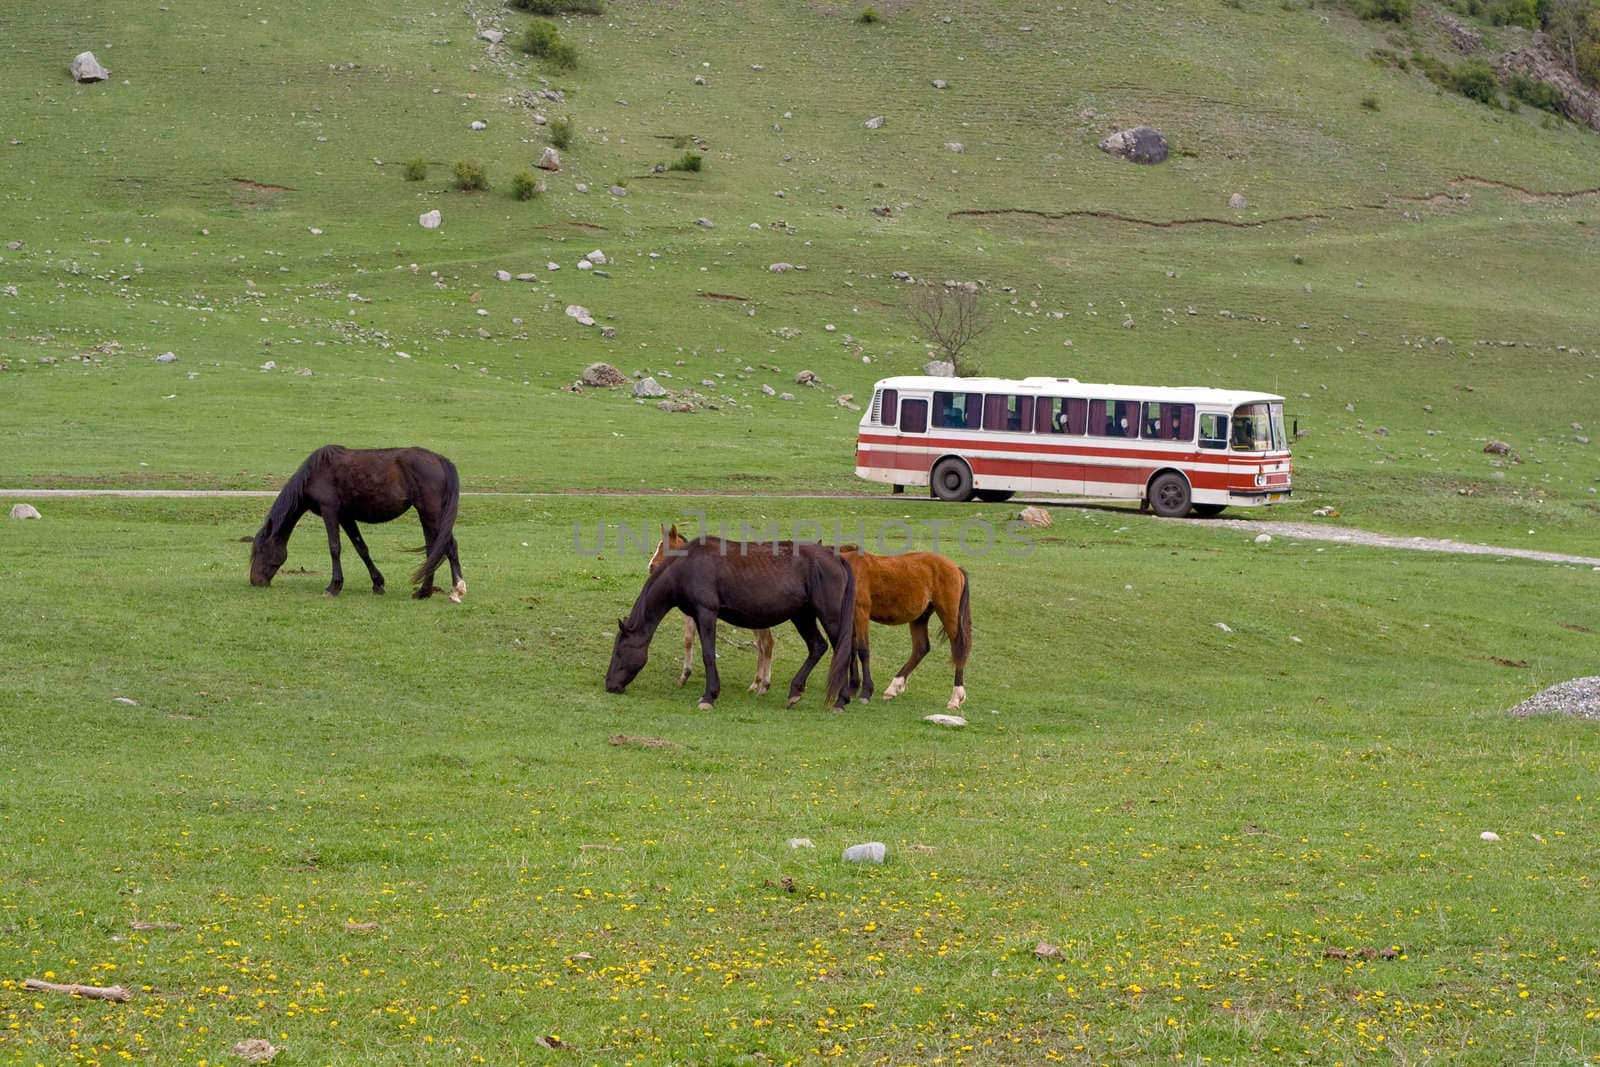 horses and bus by foaloce